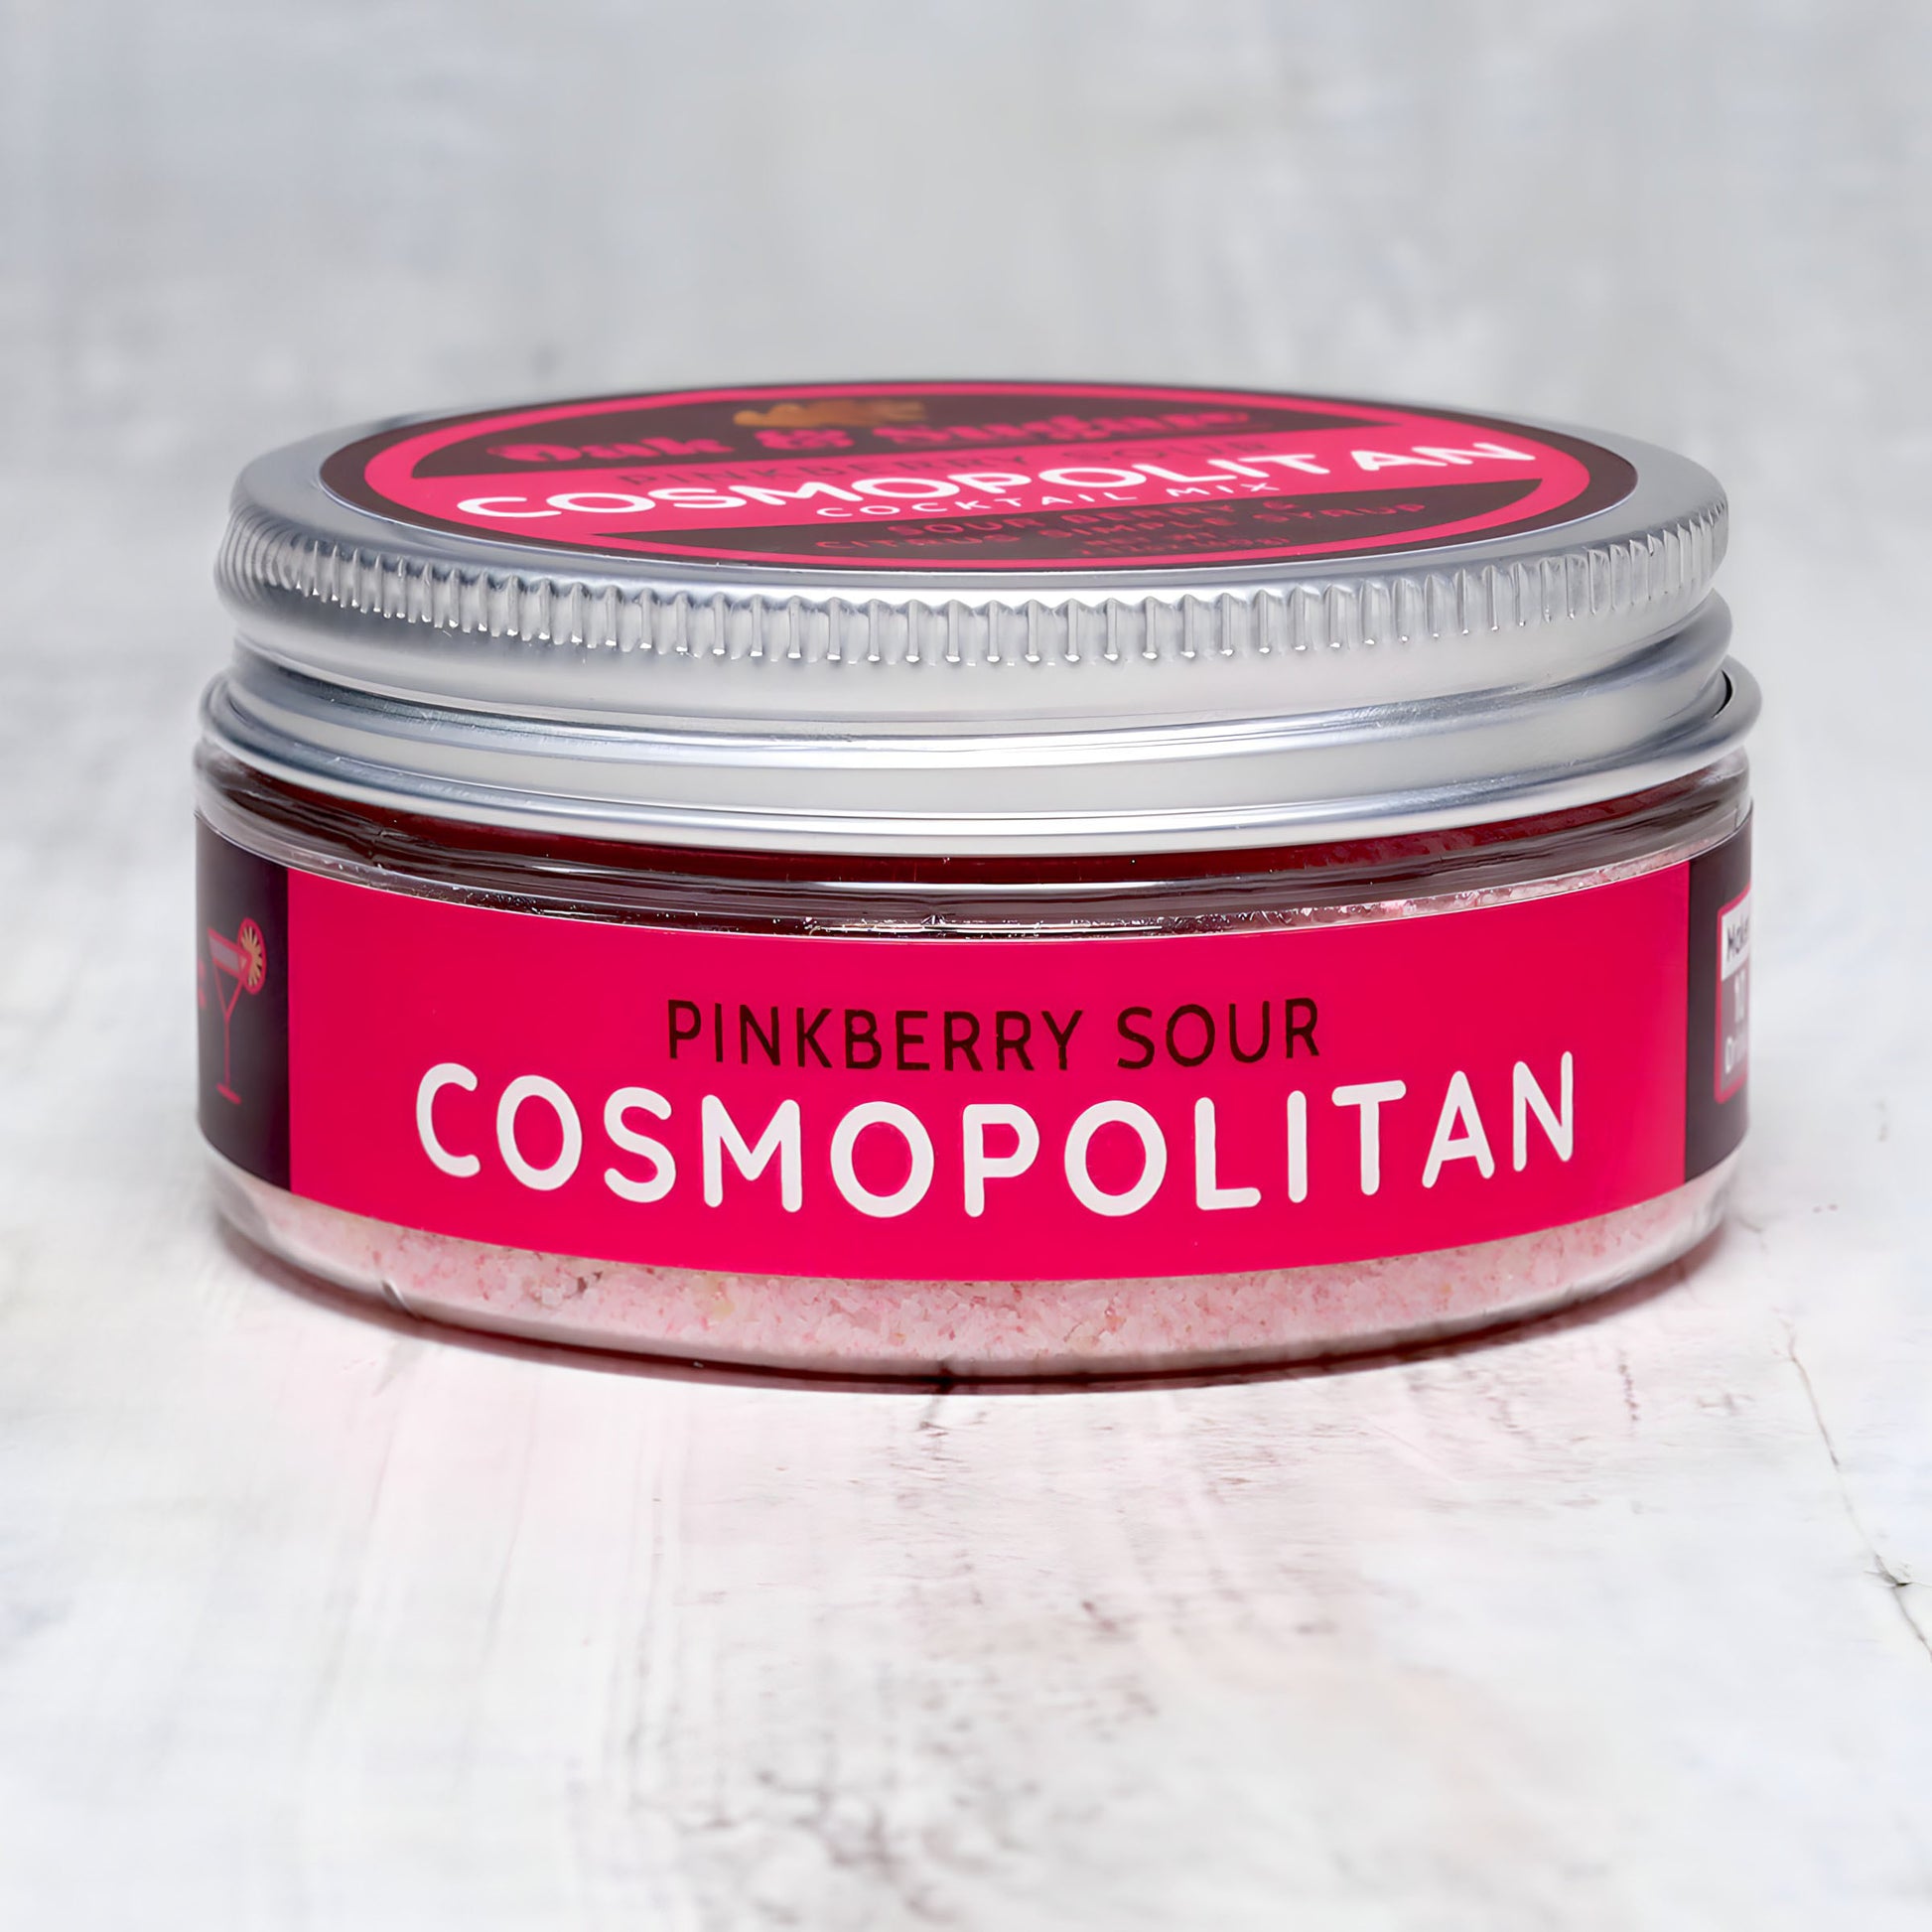 A small, round jar with a silver lid labeled "Pinkberry Sour Cosmopolitan Cocktail Mix" by Oak & Sugar. The label is primarily pink and red, with white text. The jar sits on a light, textured surface, and a portion of pink powder is visible inside. This delightful blend brings to mind the iconic posts from *Sex and the City*.